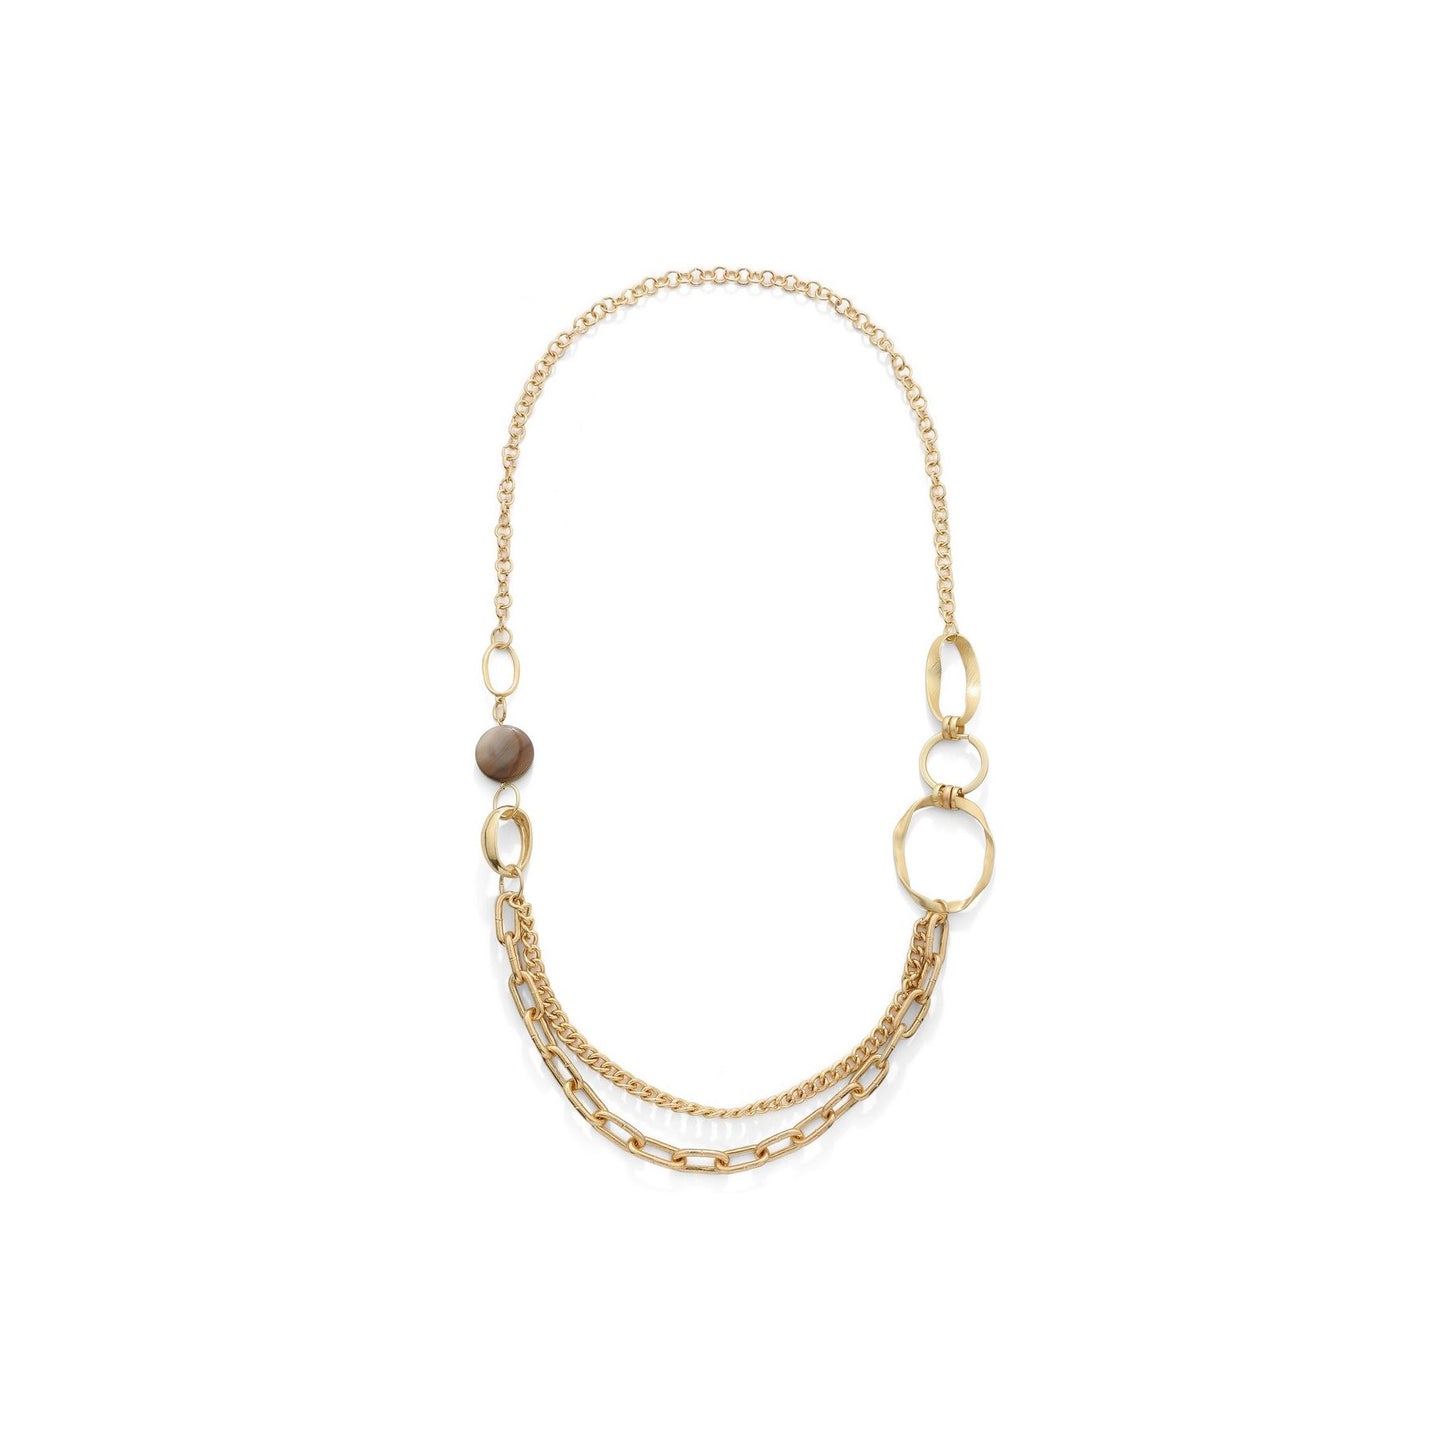 Party - Yellow Gold Mixed Link Chains with Brown Pebble Long Necklace from Frinkle